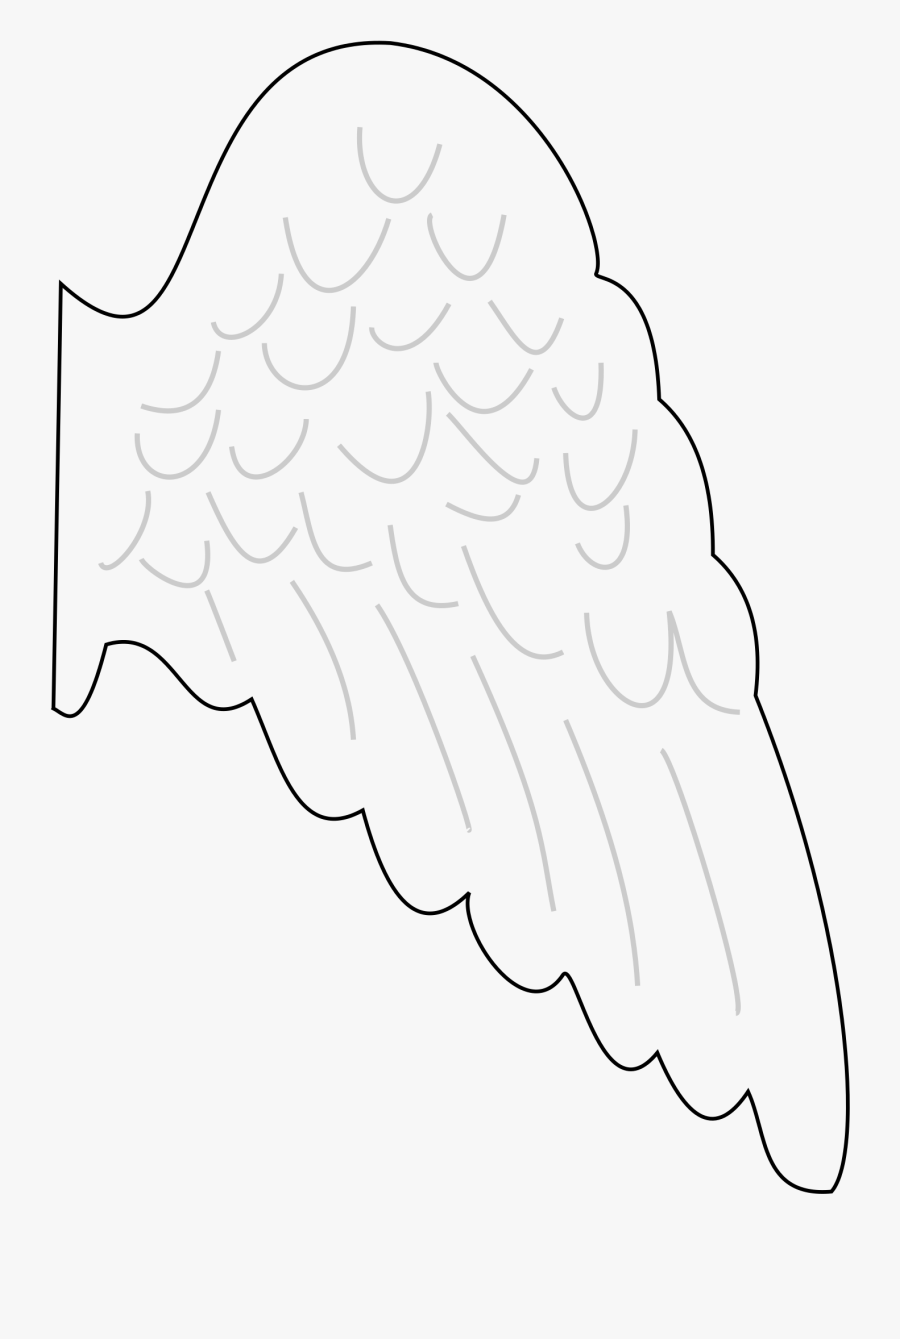 angel-wings-clipart-clipartix-angel-wing-template-printable-free